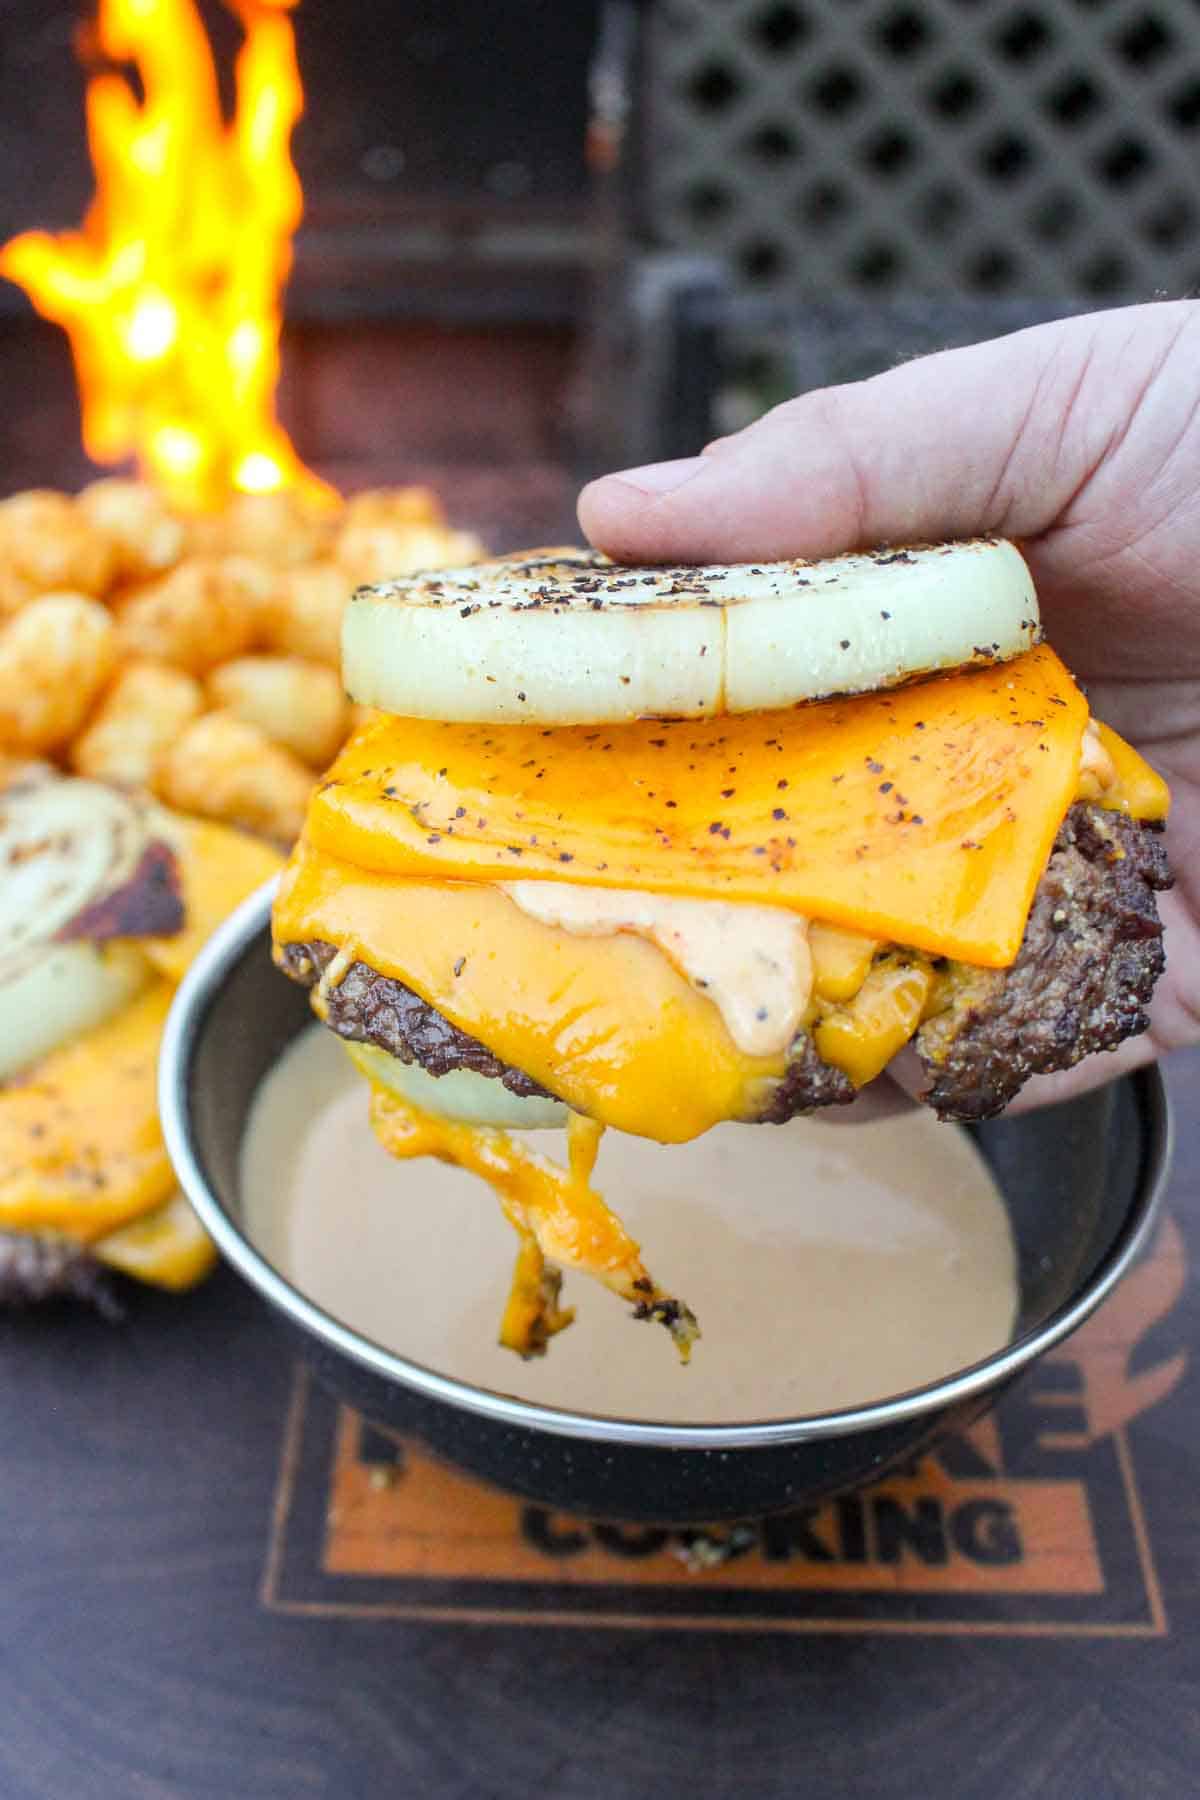 The finished masterpiece, a low-carb cheeseburger inspired by In and Out Burgers. 